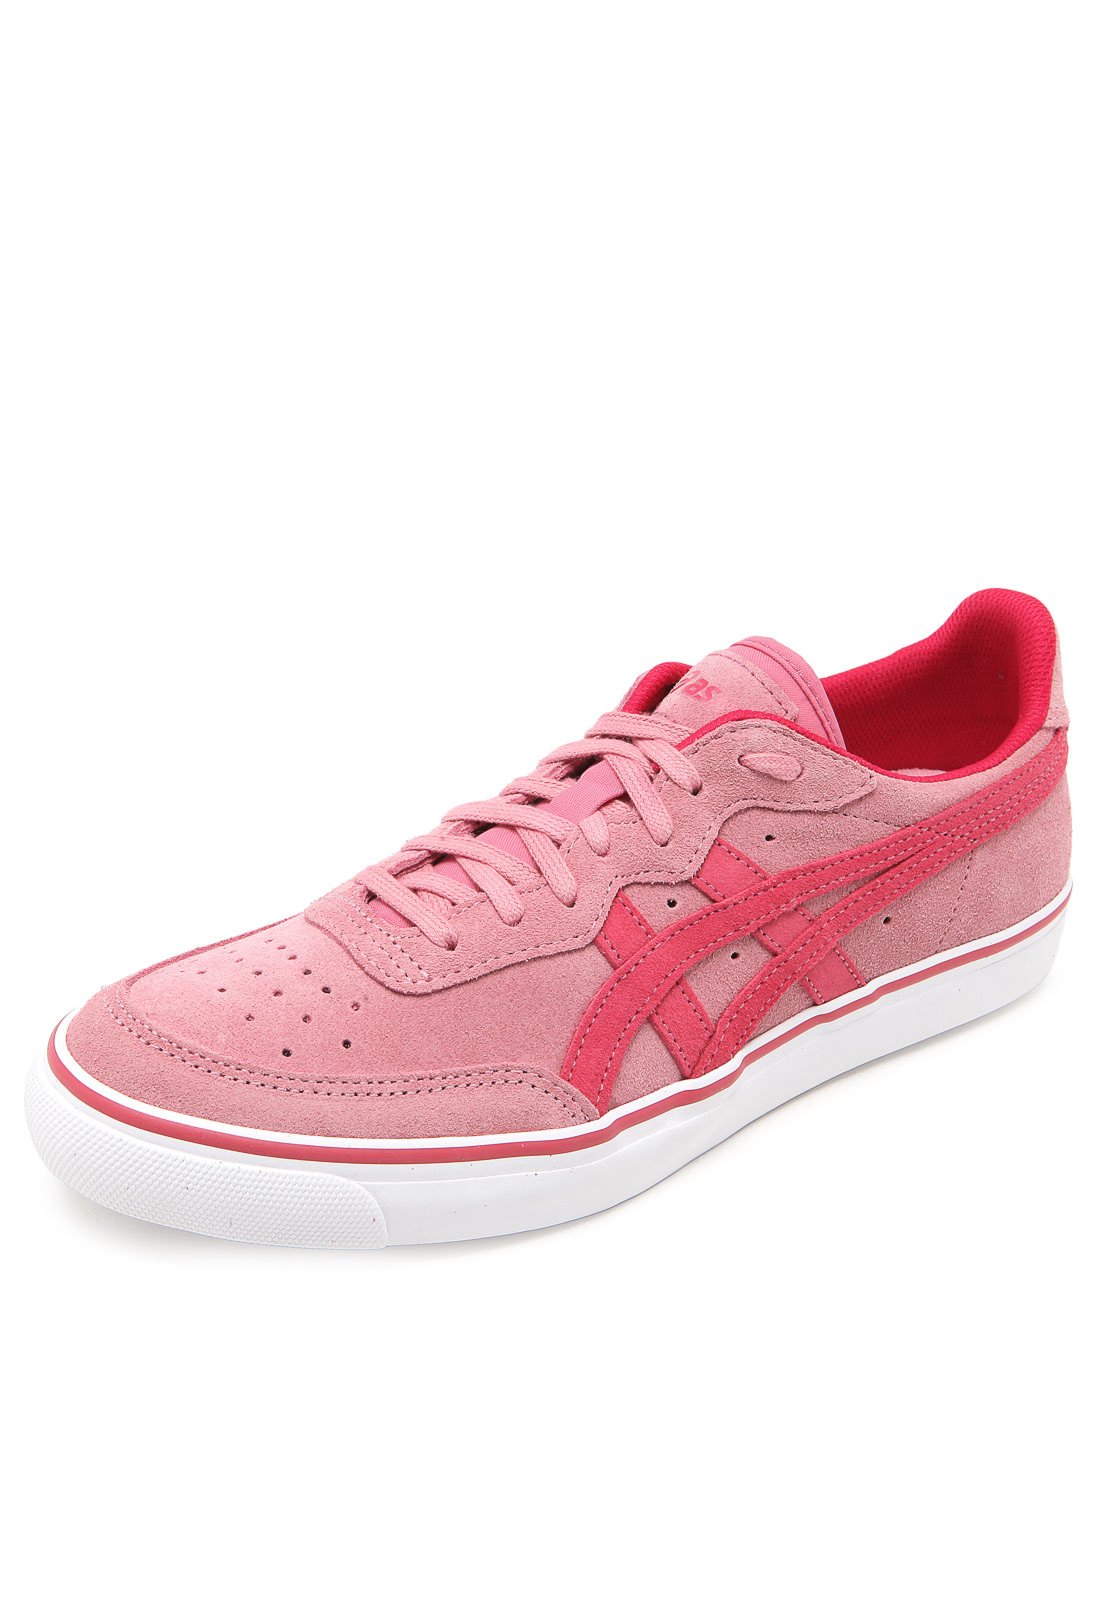 asics top spin lea